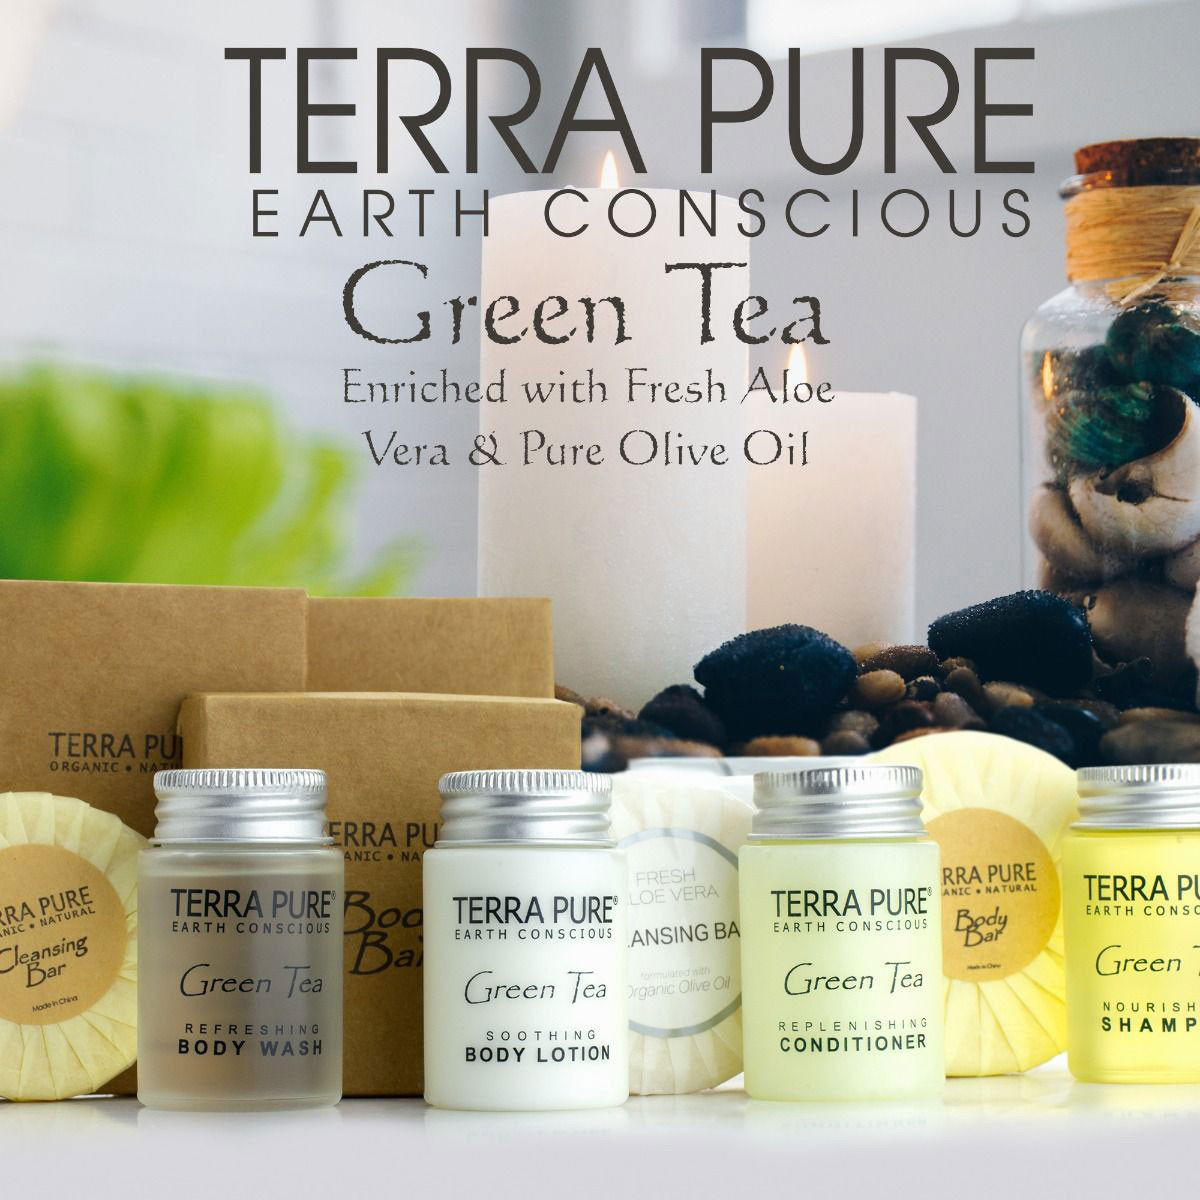 Who will be drawn to the packaging of the TERRA PURE GREEN TEA Collection?